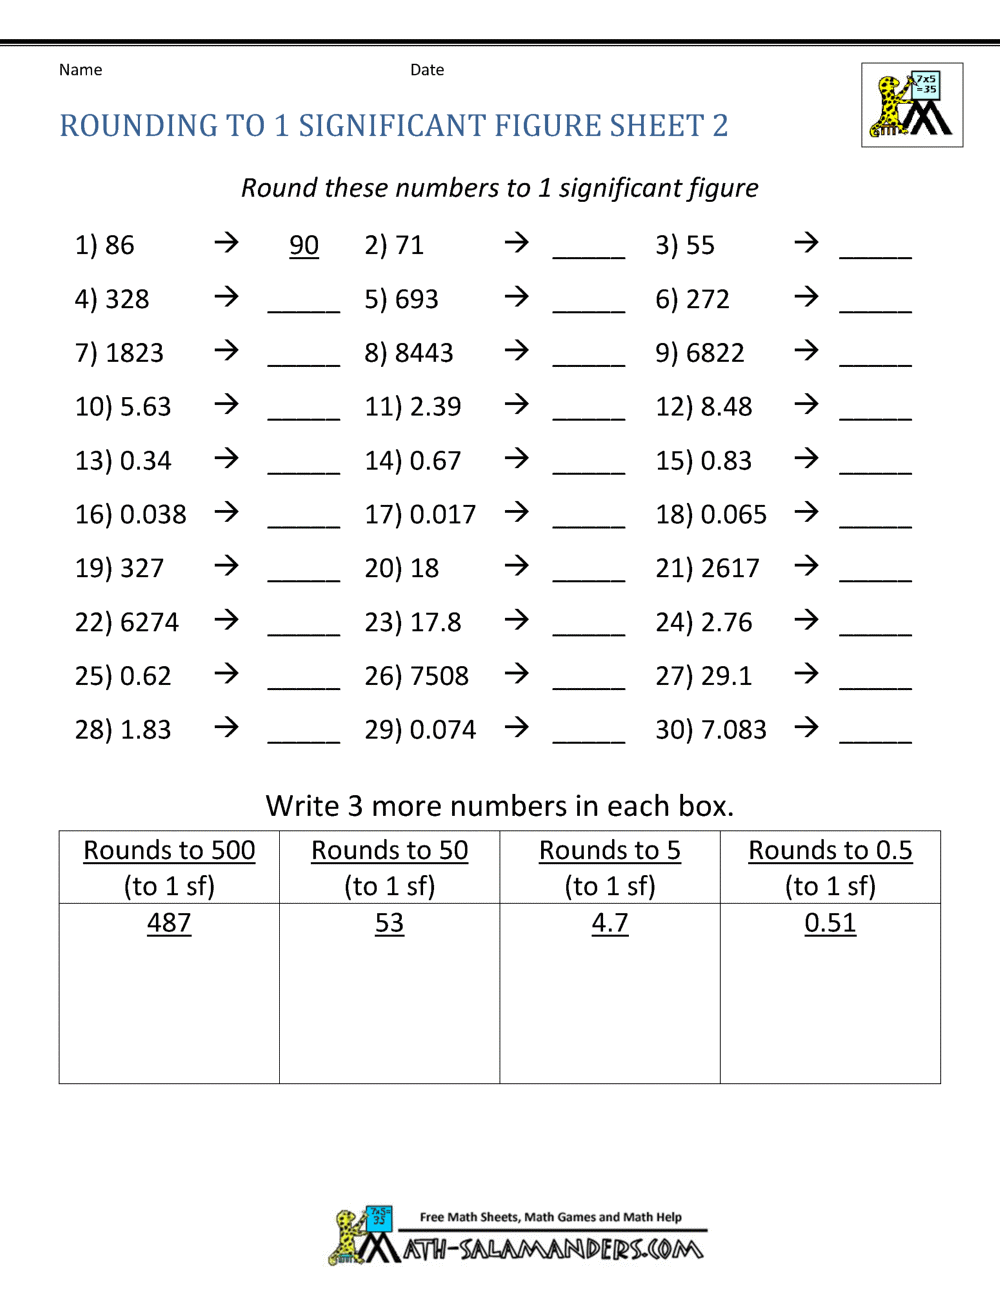 Rounding Significant Figures Within Significant Figures Practice Worksheet